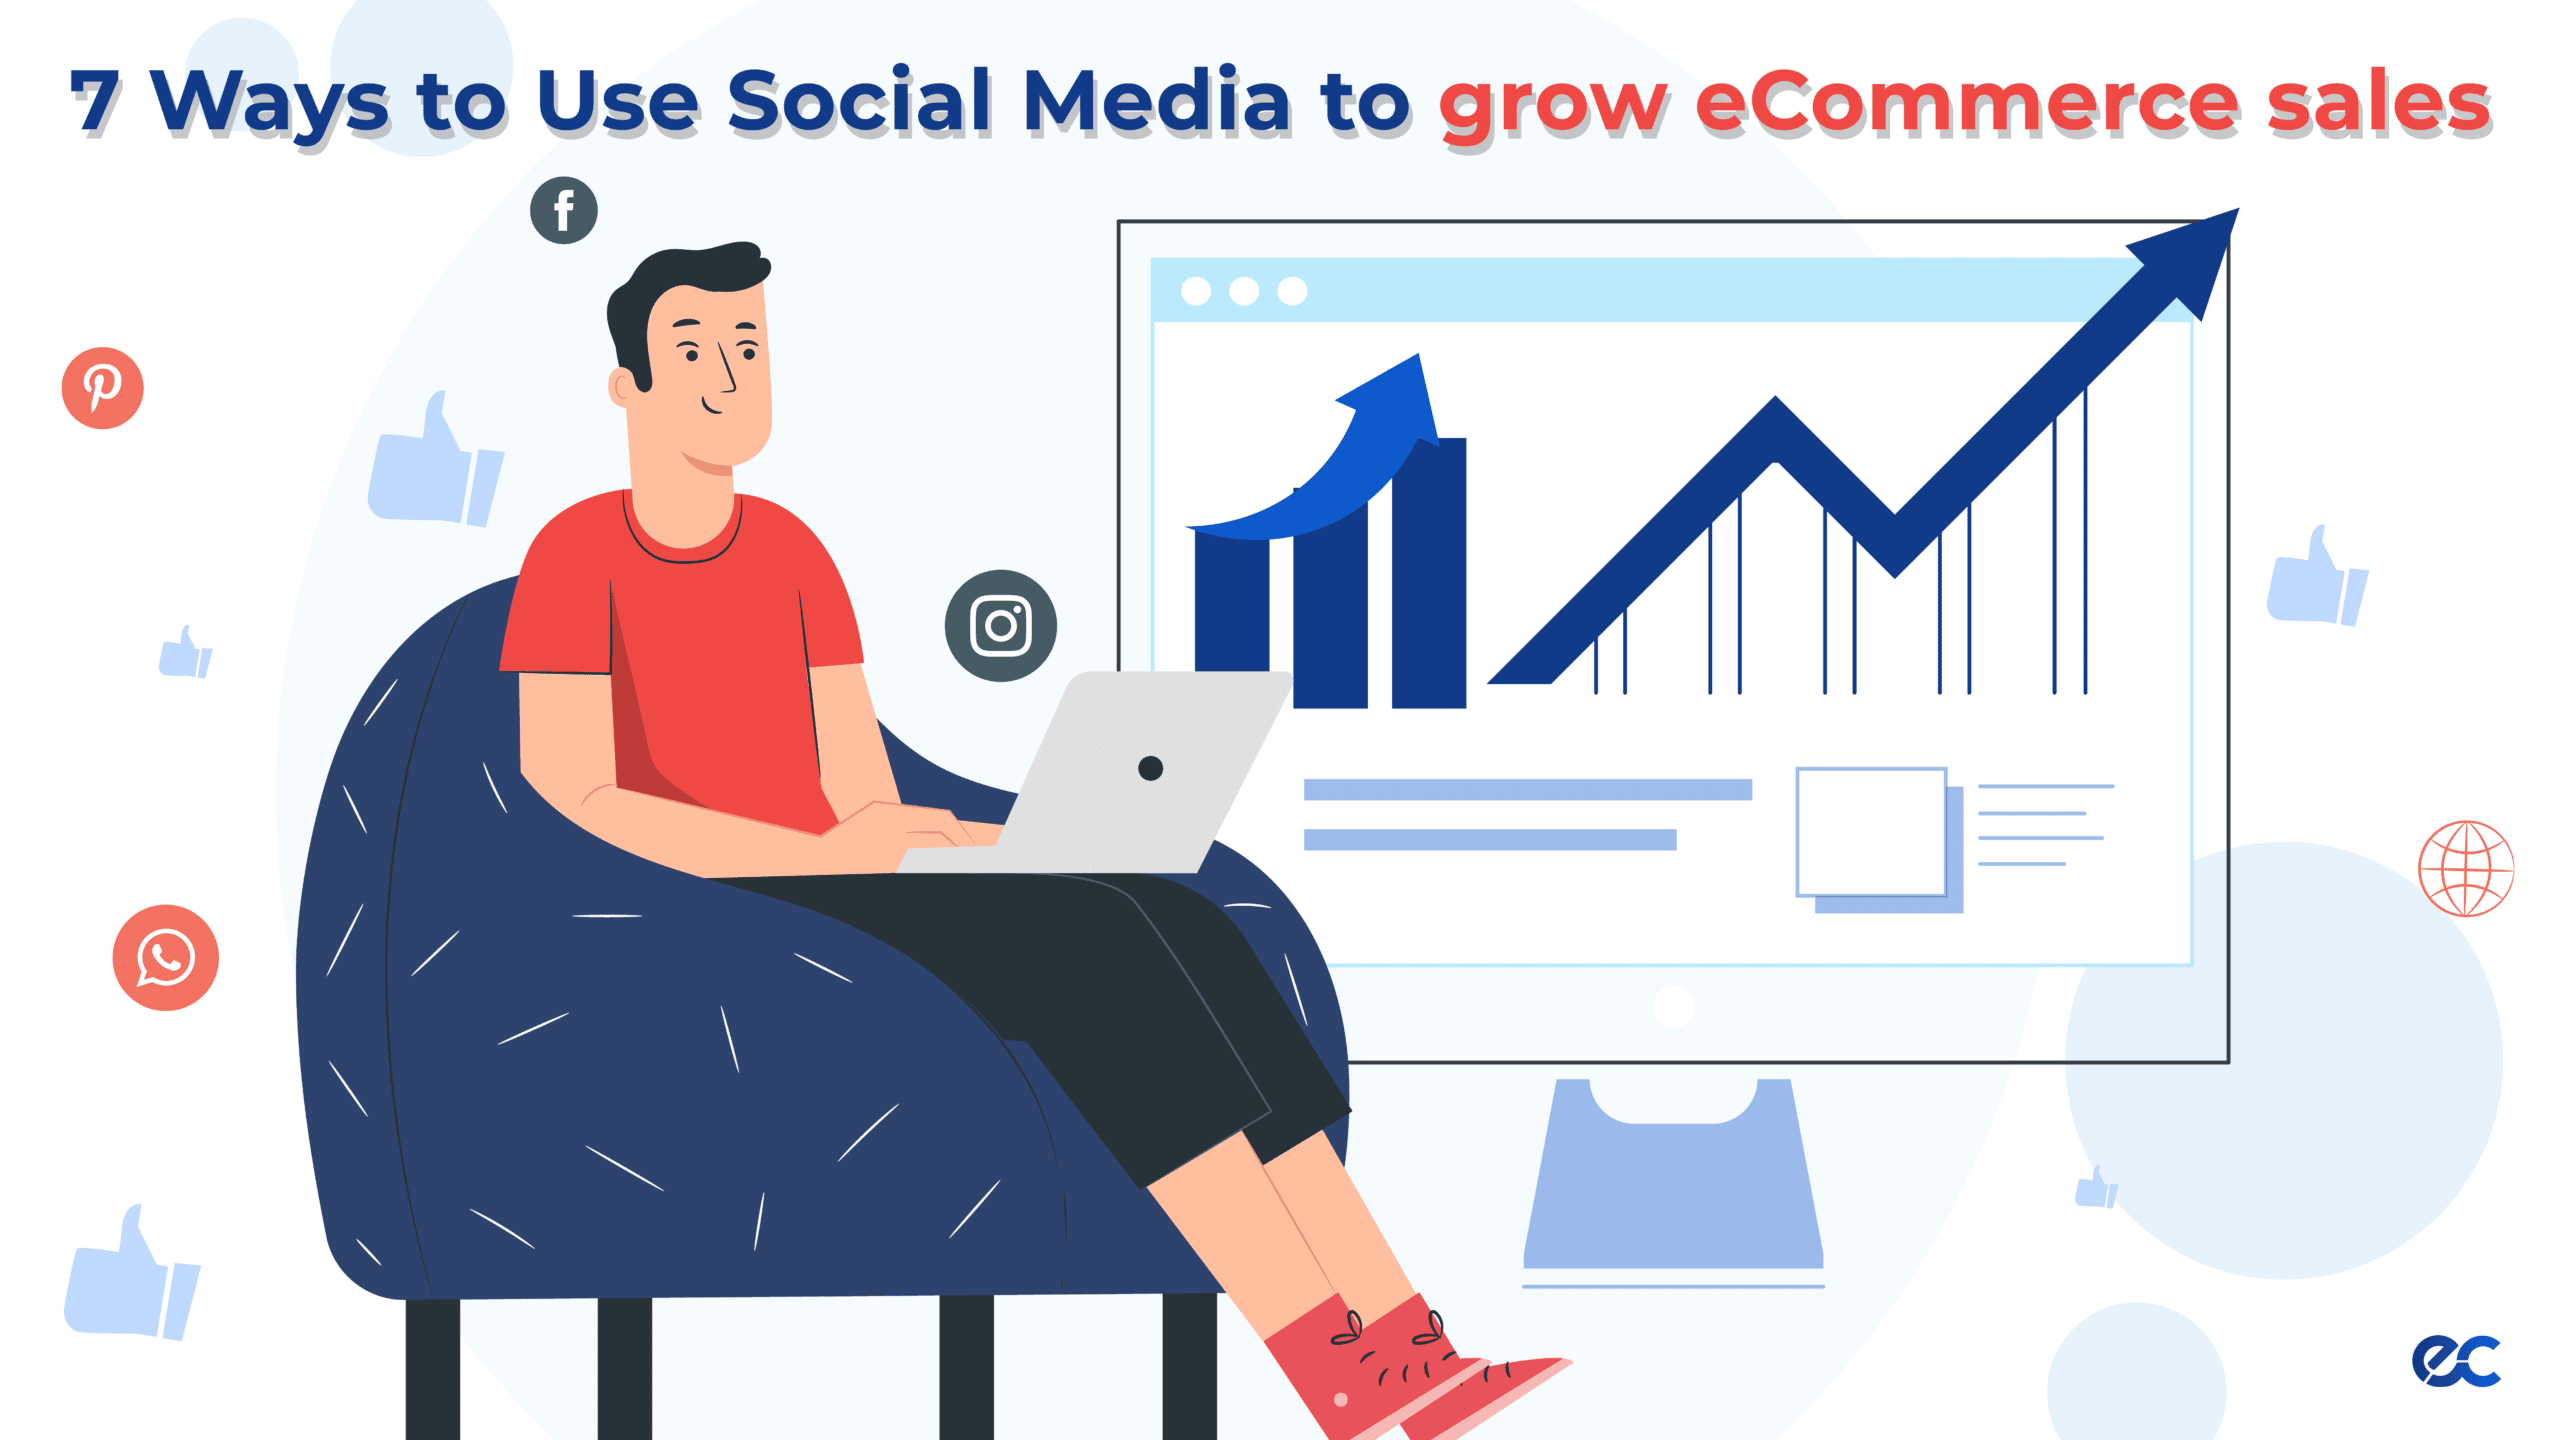 7 Ways to Use Social Media to grow eCommerce sales (Hands-on/Proven tactics)